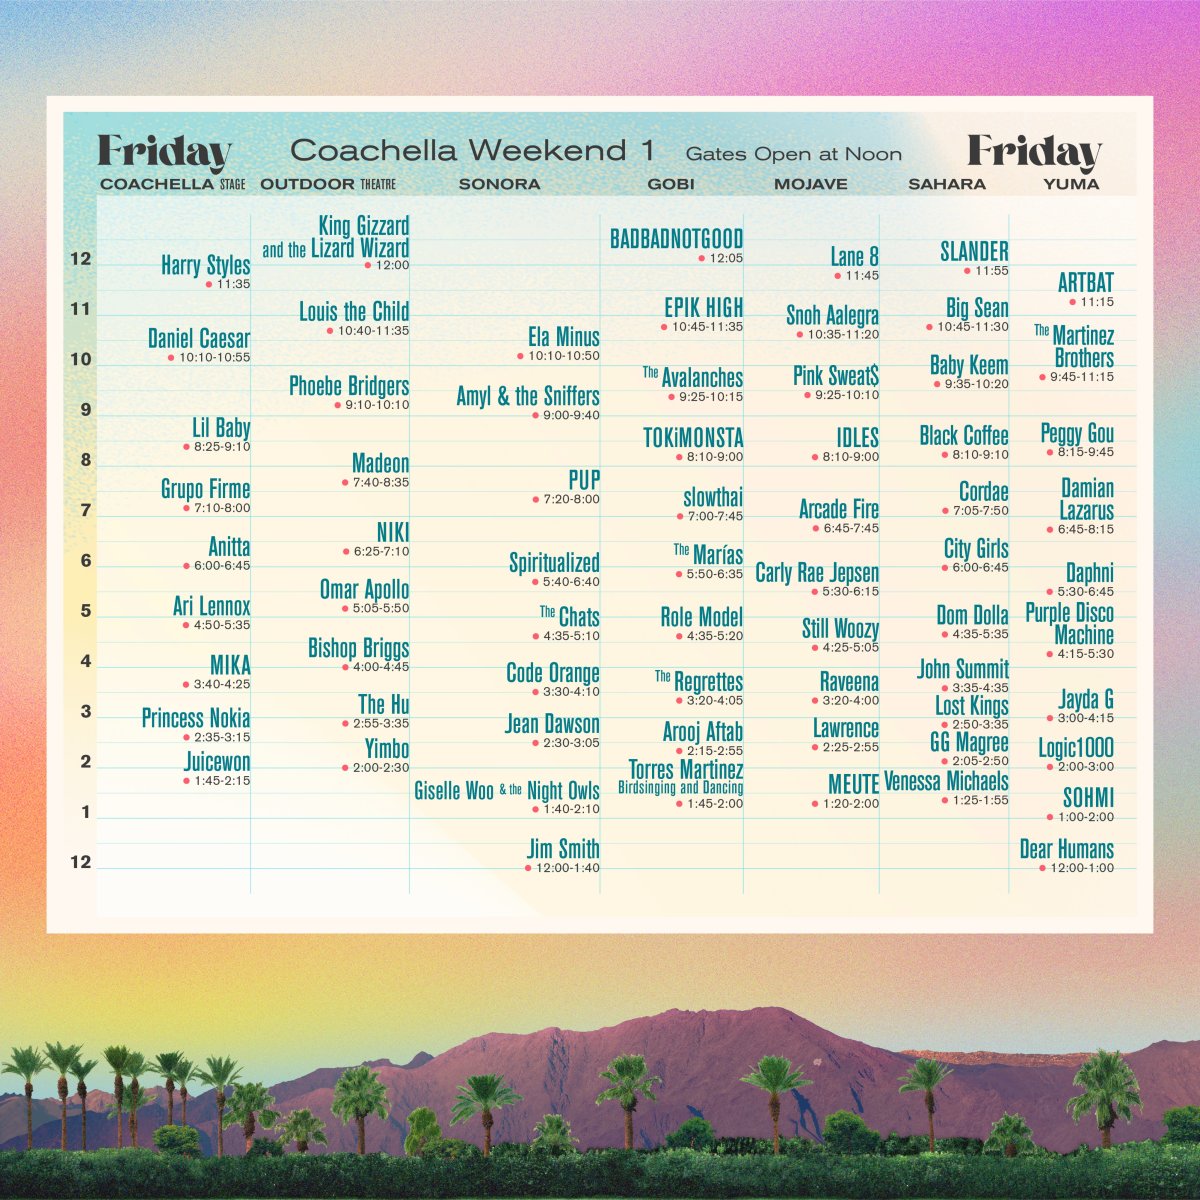 Coachella Weekend 1 set times for Friday, April 15th.